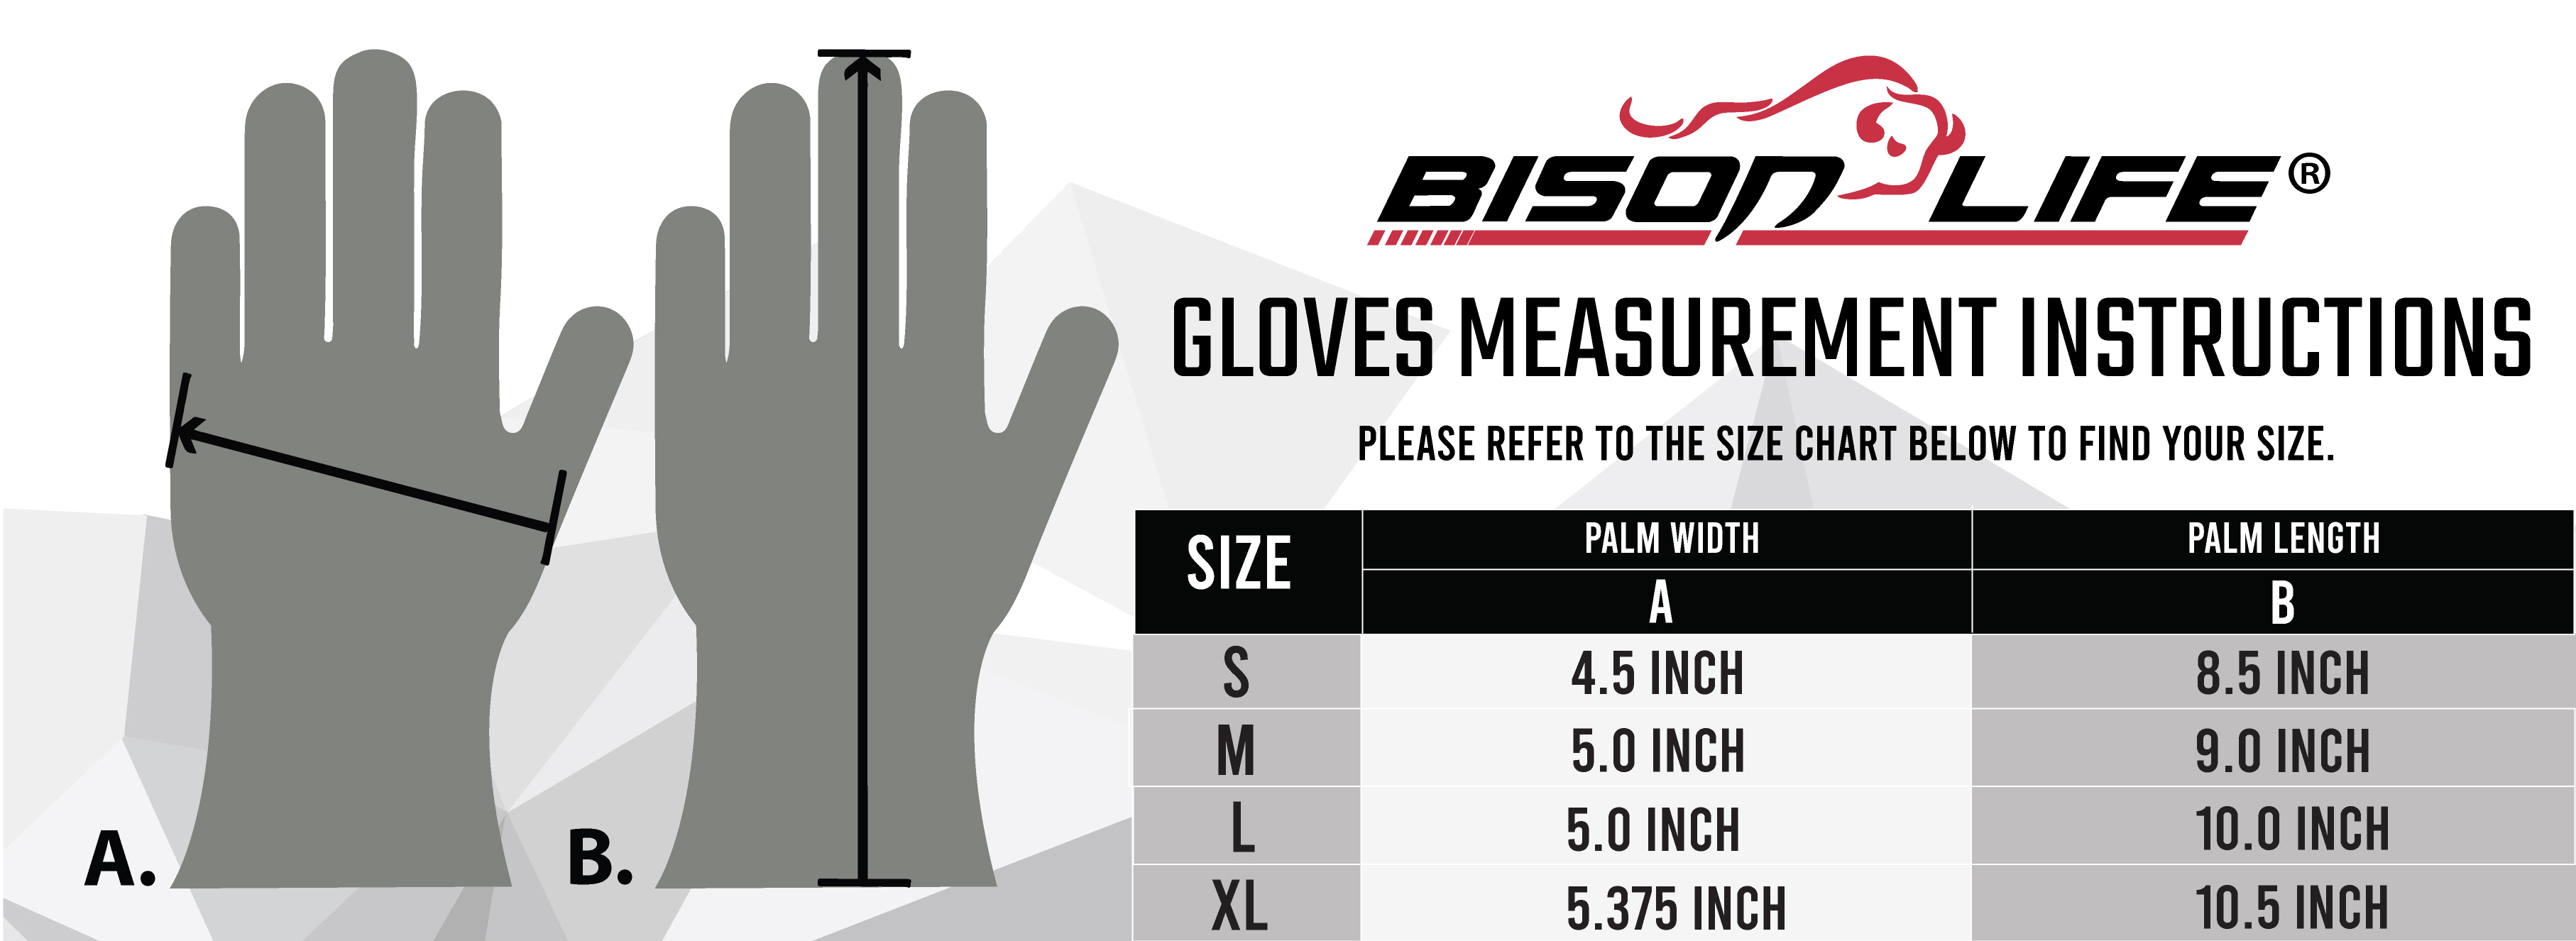 Stainless Steel Resistant Gloves Size Chart